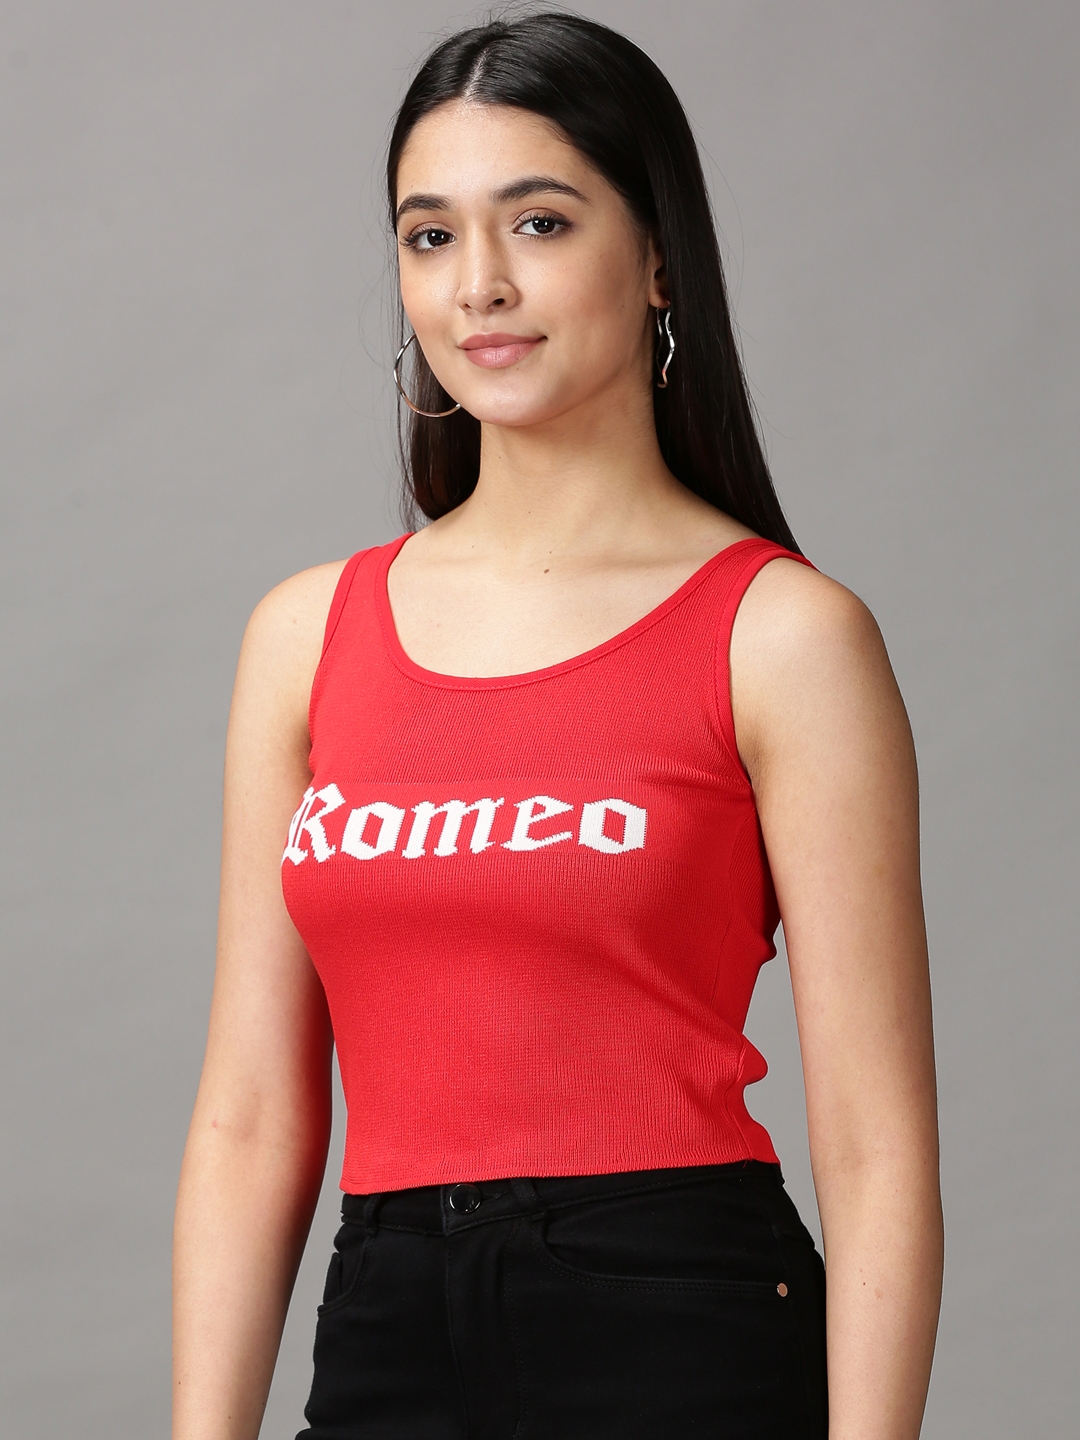 Women's Red Polycotton Solid Tops